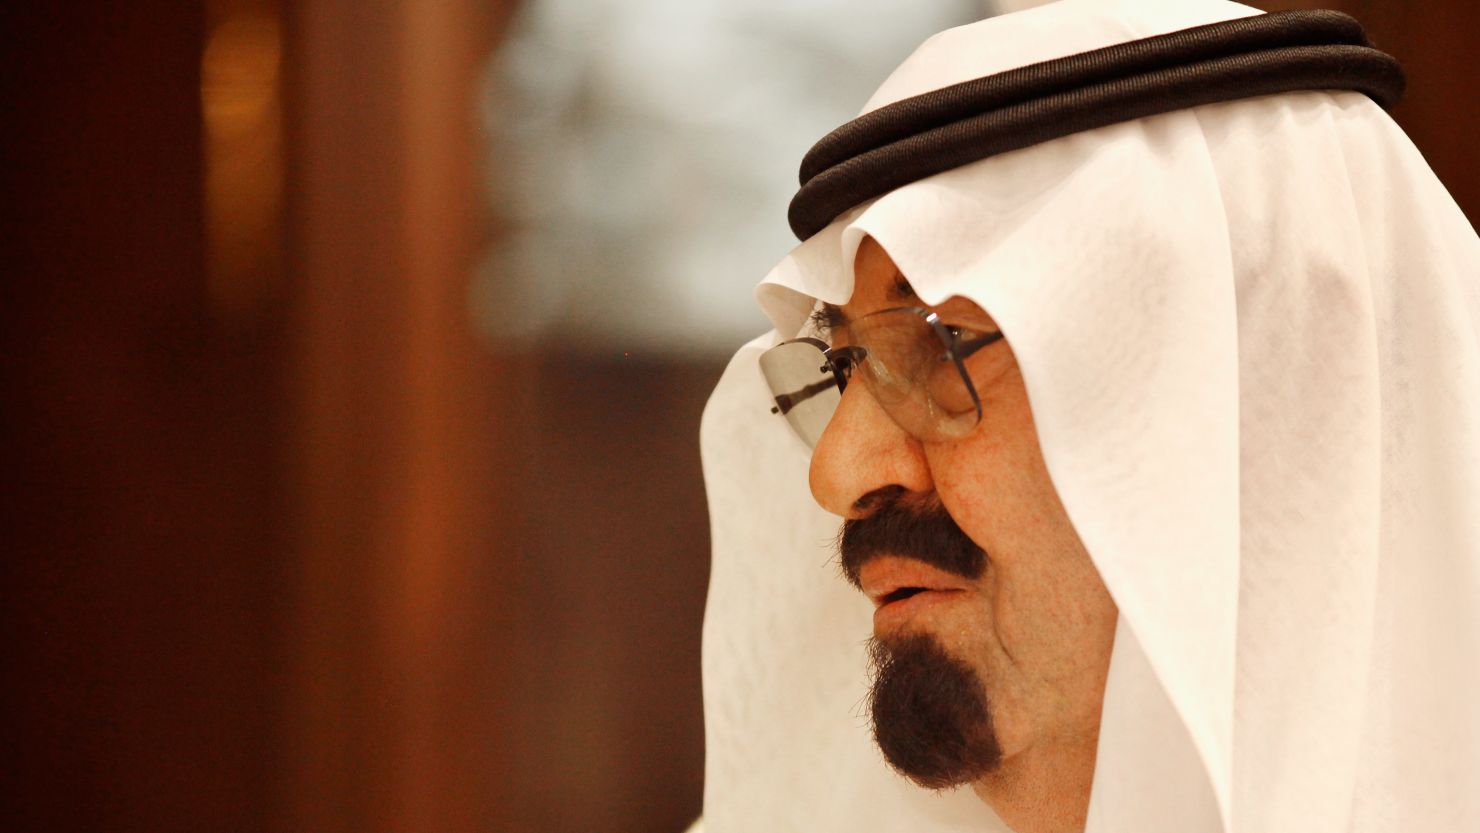 Saudi Arabia's King Abdullah says women will be allowed to run in council elections.